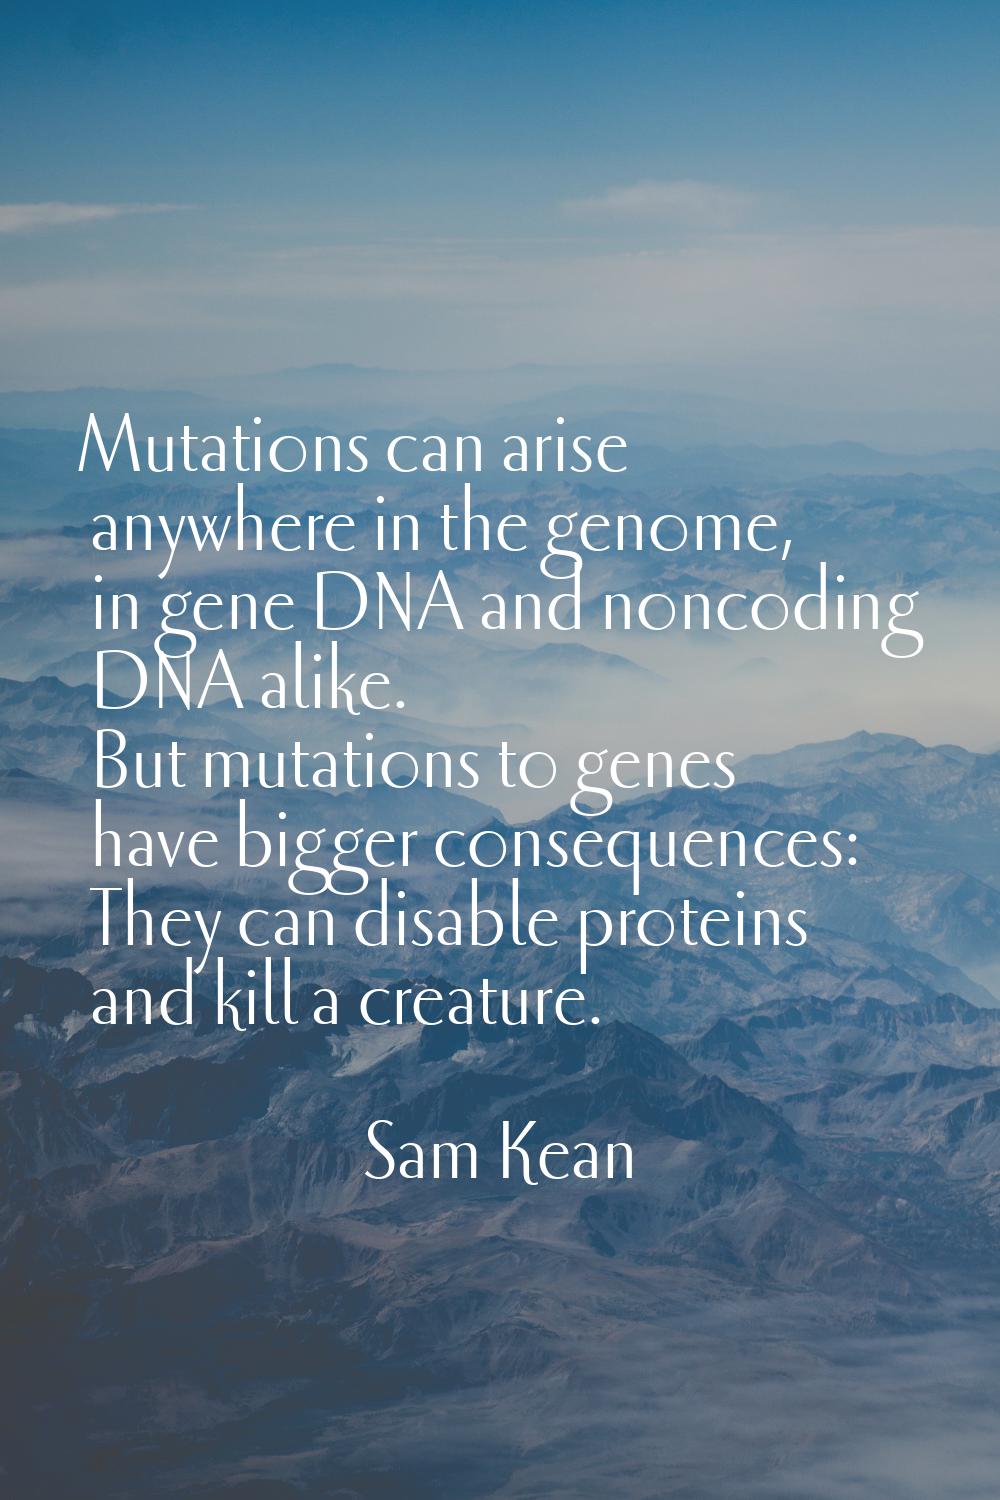 Mutations can arise anywhere in the genome, in gene DNA and noncoding DNA alike. But mutations to g